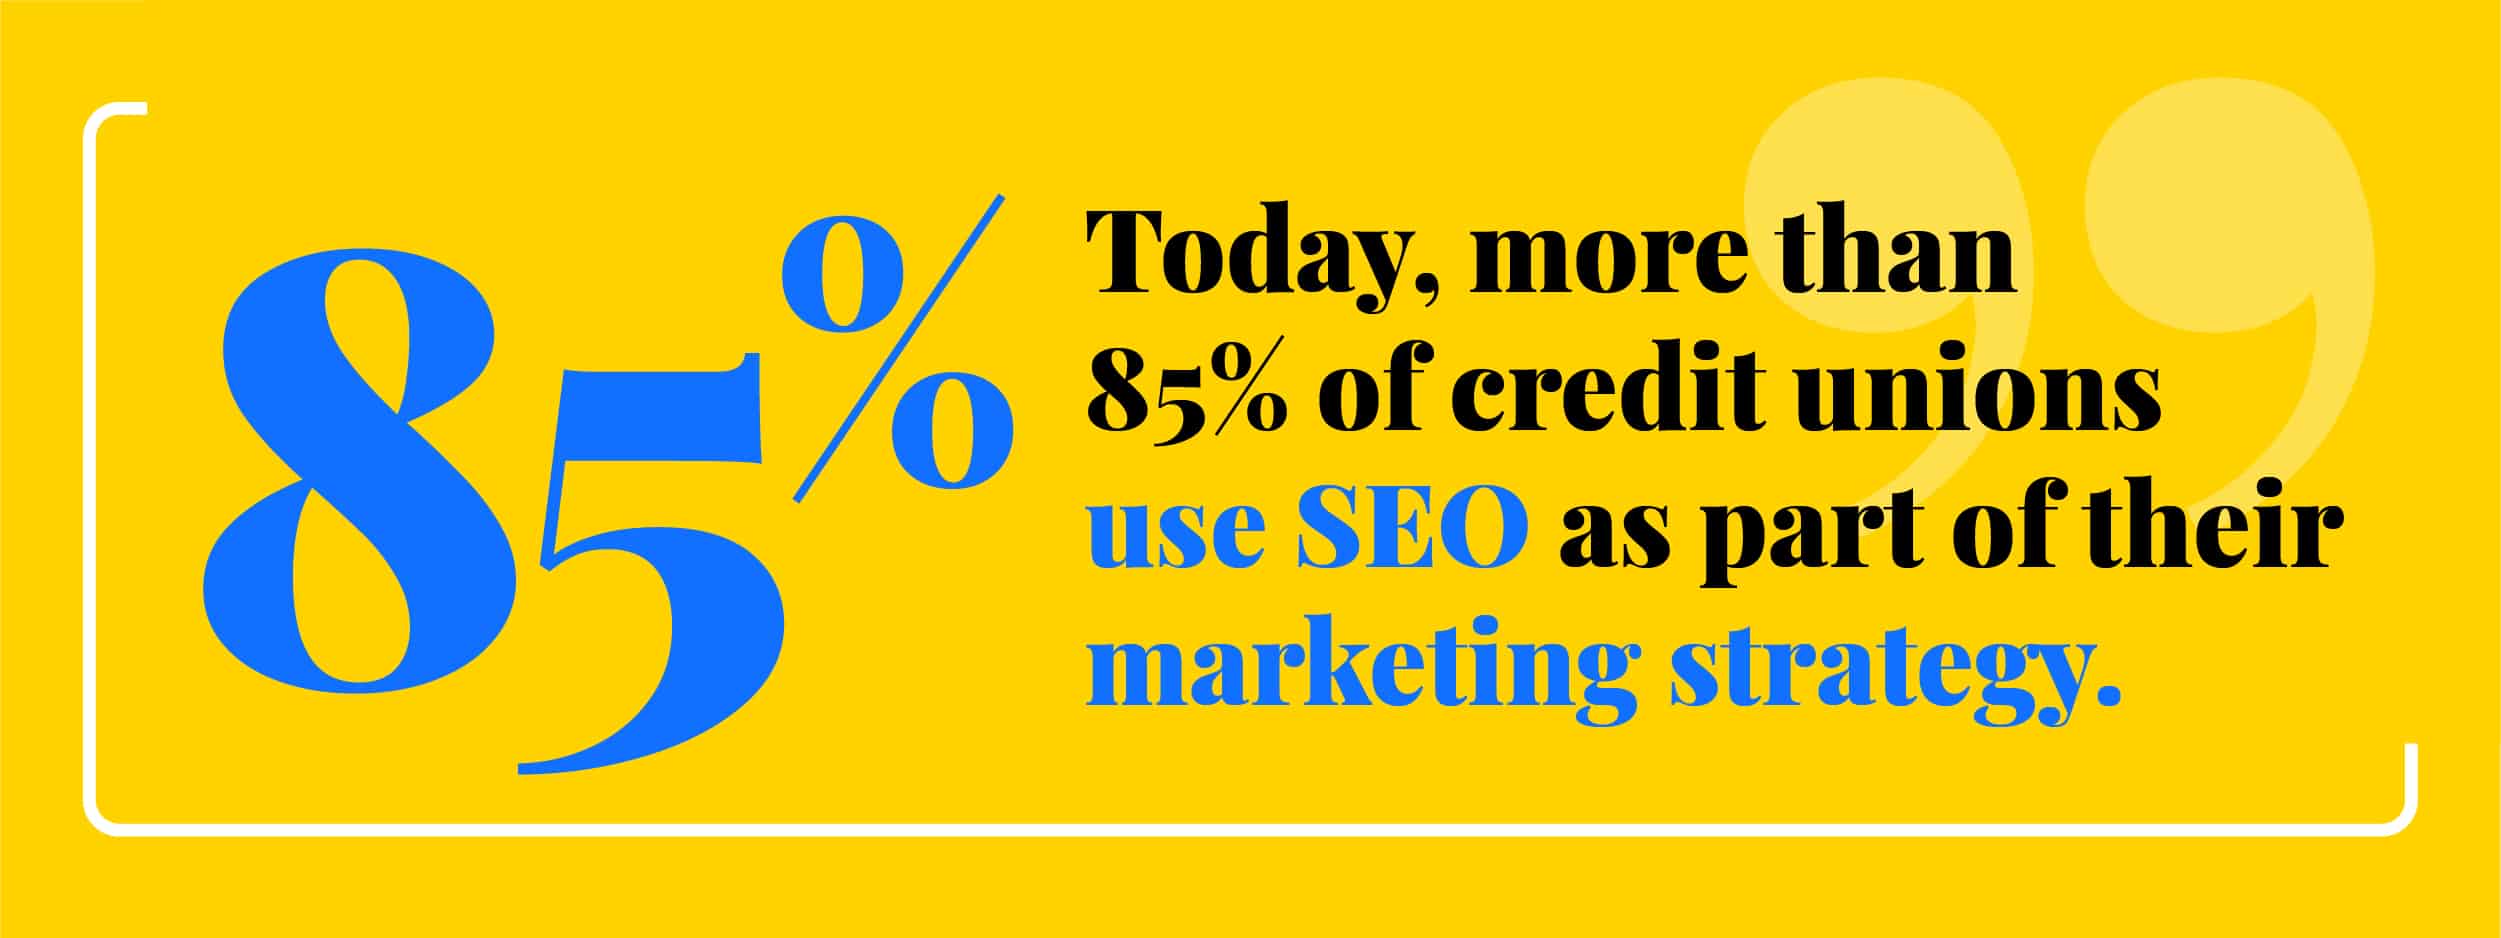 Today, more than 85% of credit unions use SEO as part of their marketing strategy.